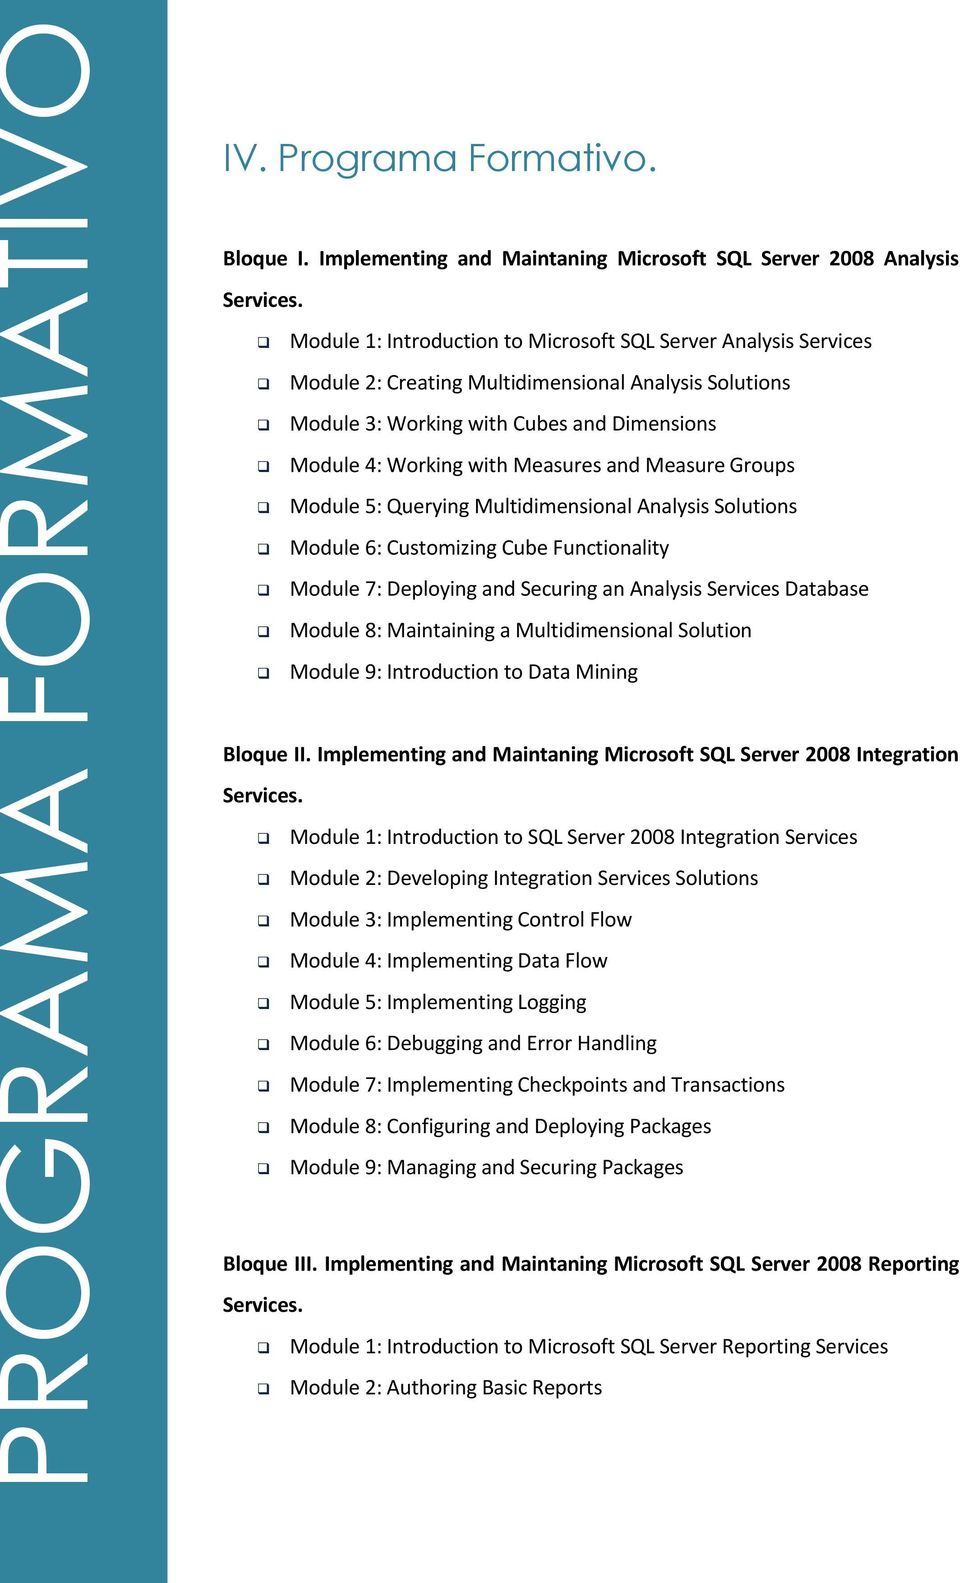 Measure Groups Module 5: Querying Multidimensional Analysis Solutions Module 6: Customizing Cube Functionality Module 7: Deploying and Securing an Analysis Services Database Module 8: Maintaining a